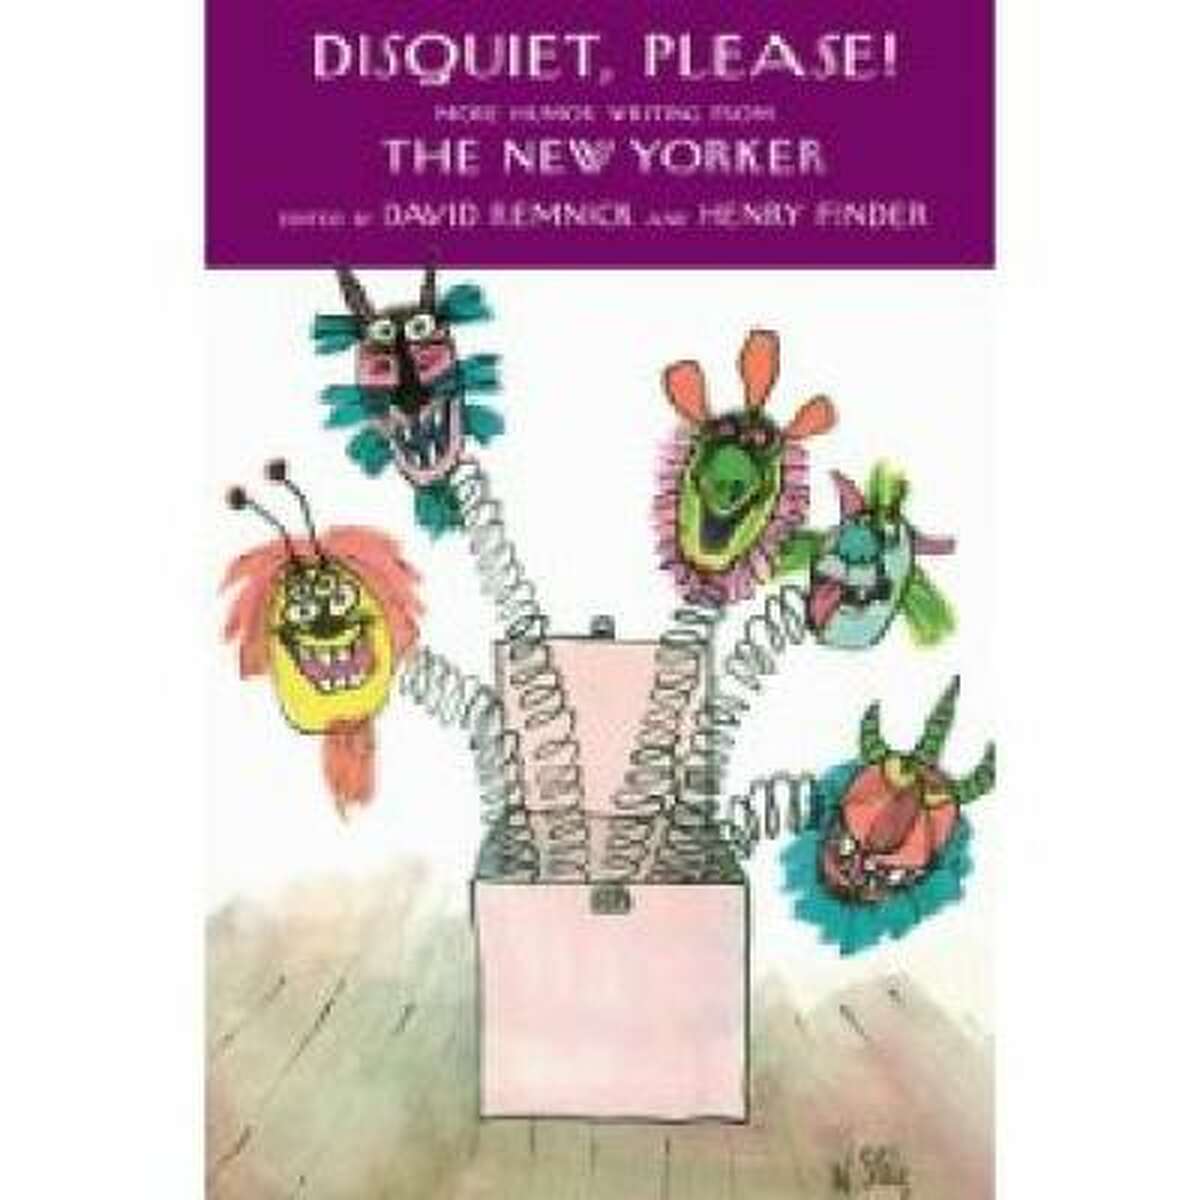 Disquiet, Please! More Humor Writing From The New Yorker: Edited by David Remnick and Henry Finder. Random House, 525 pp. $30